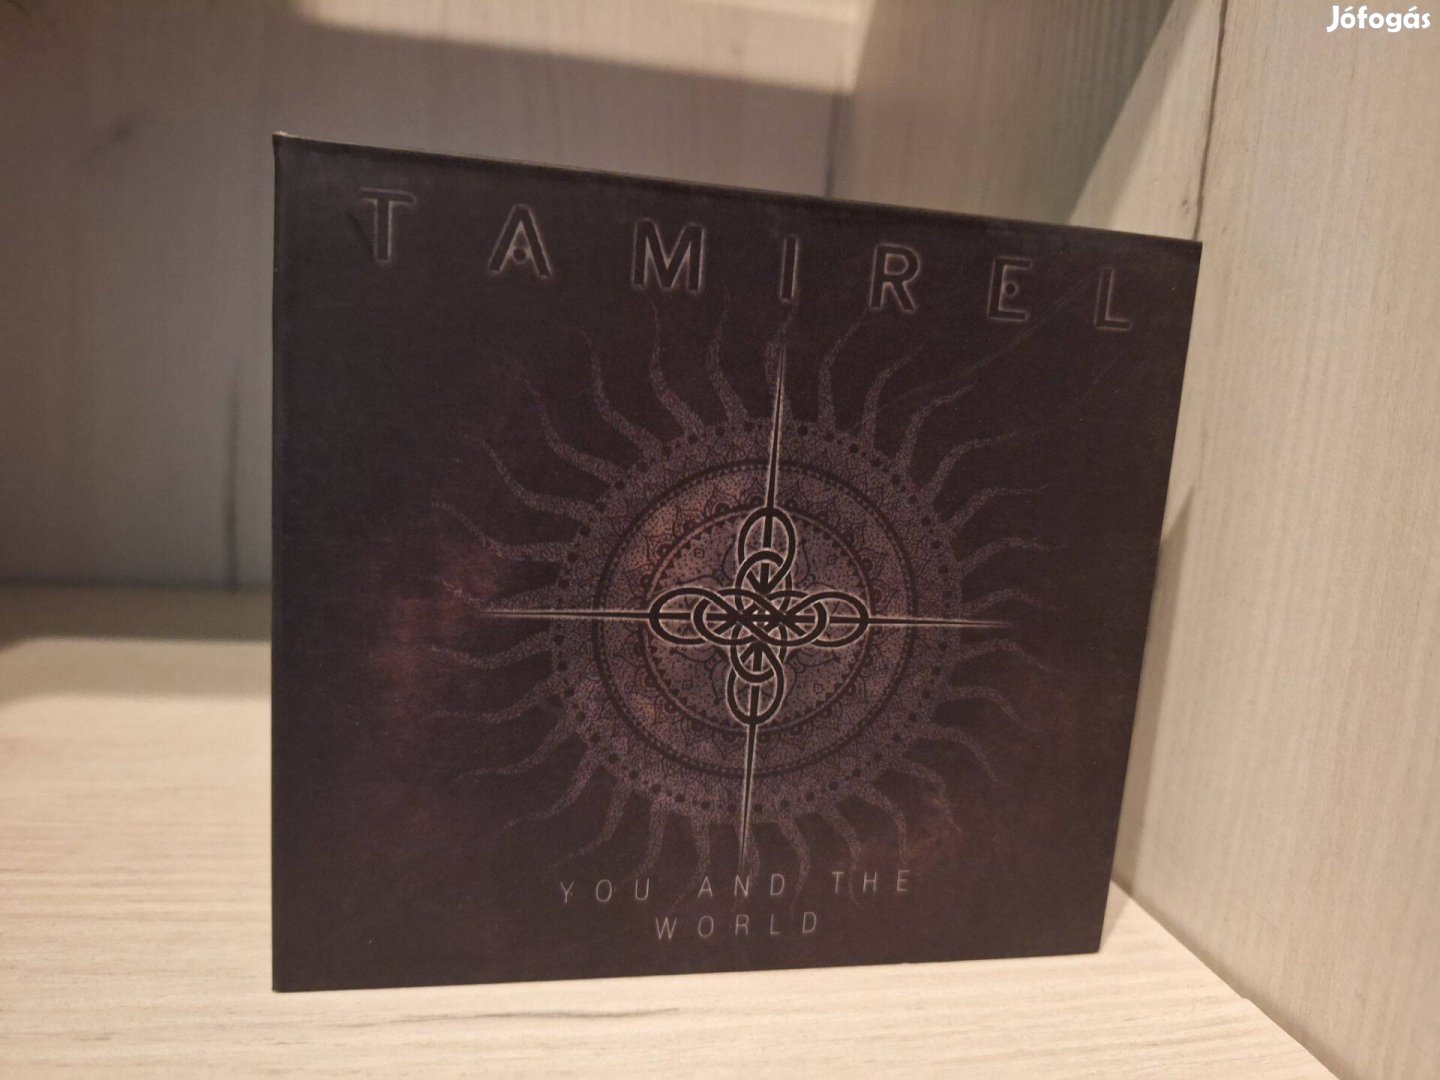 Tamirel - You And The World CD Limited Edition